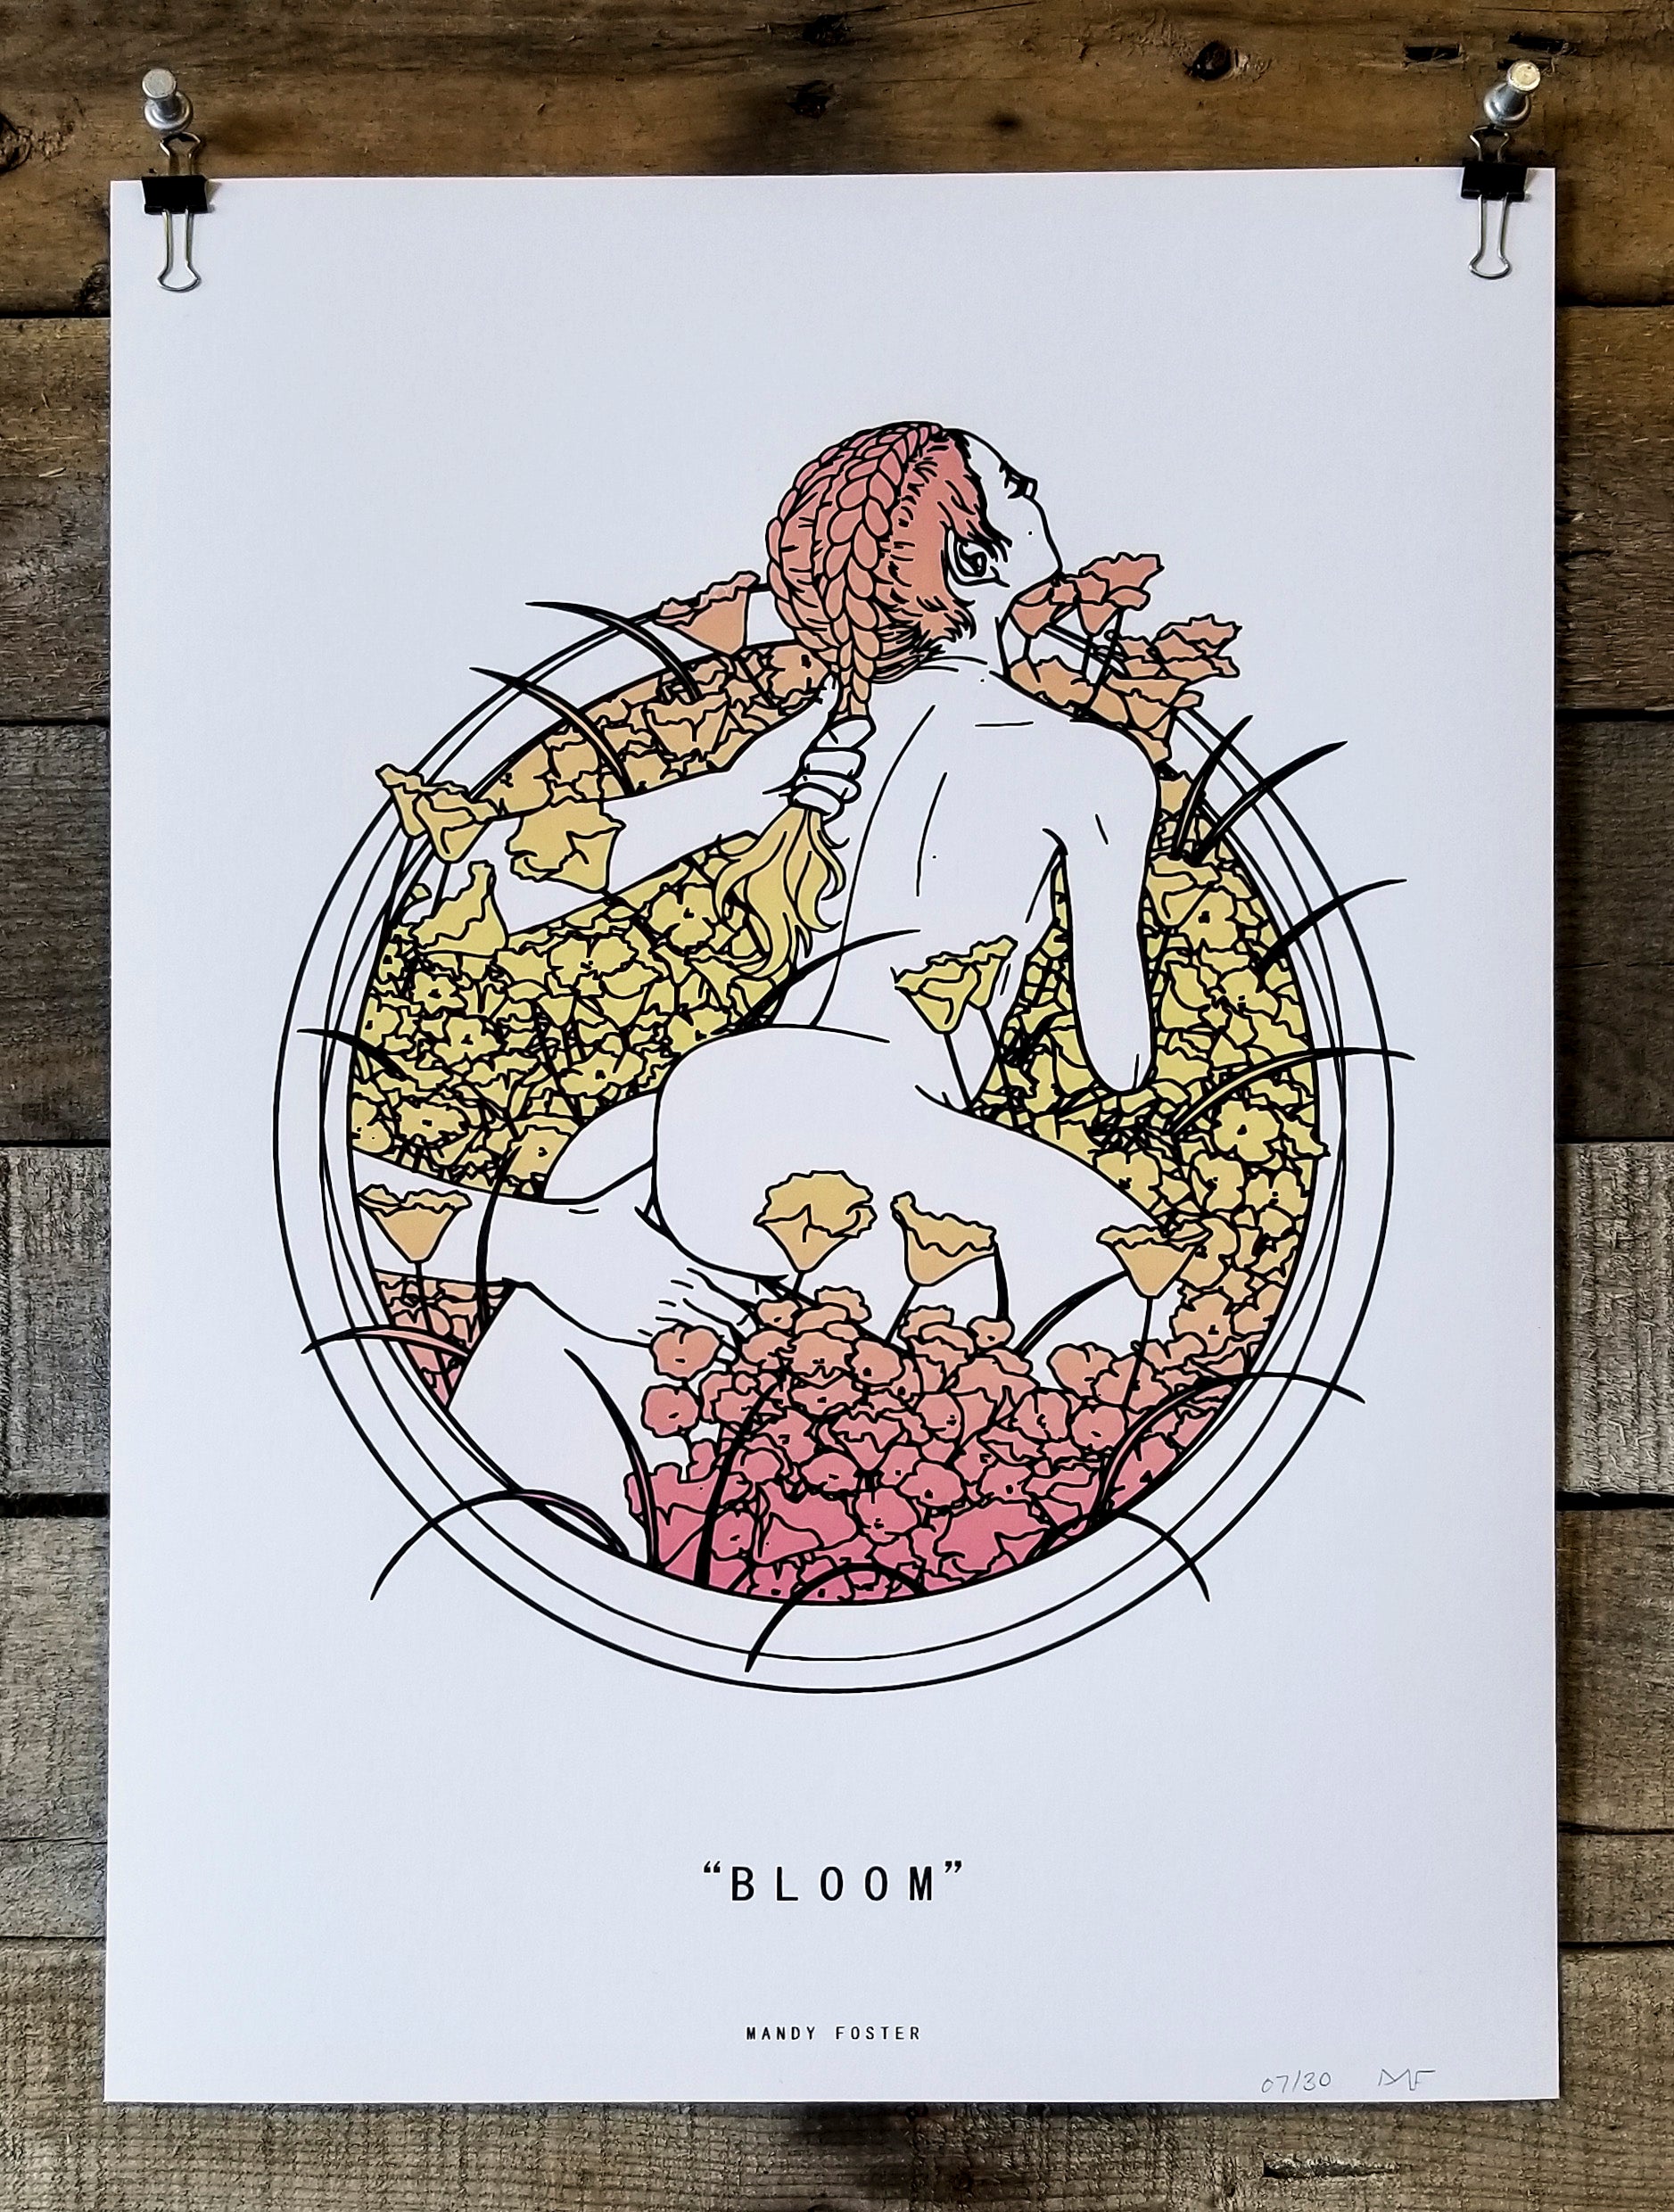 A screen print designed by Mandy Foster of a woman in a field of flowers 